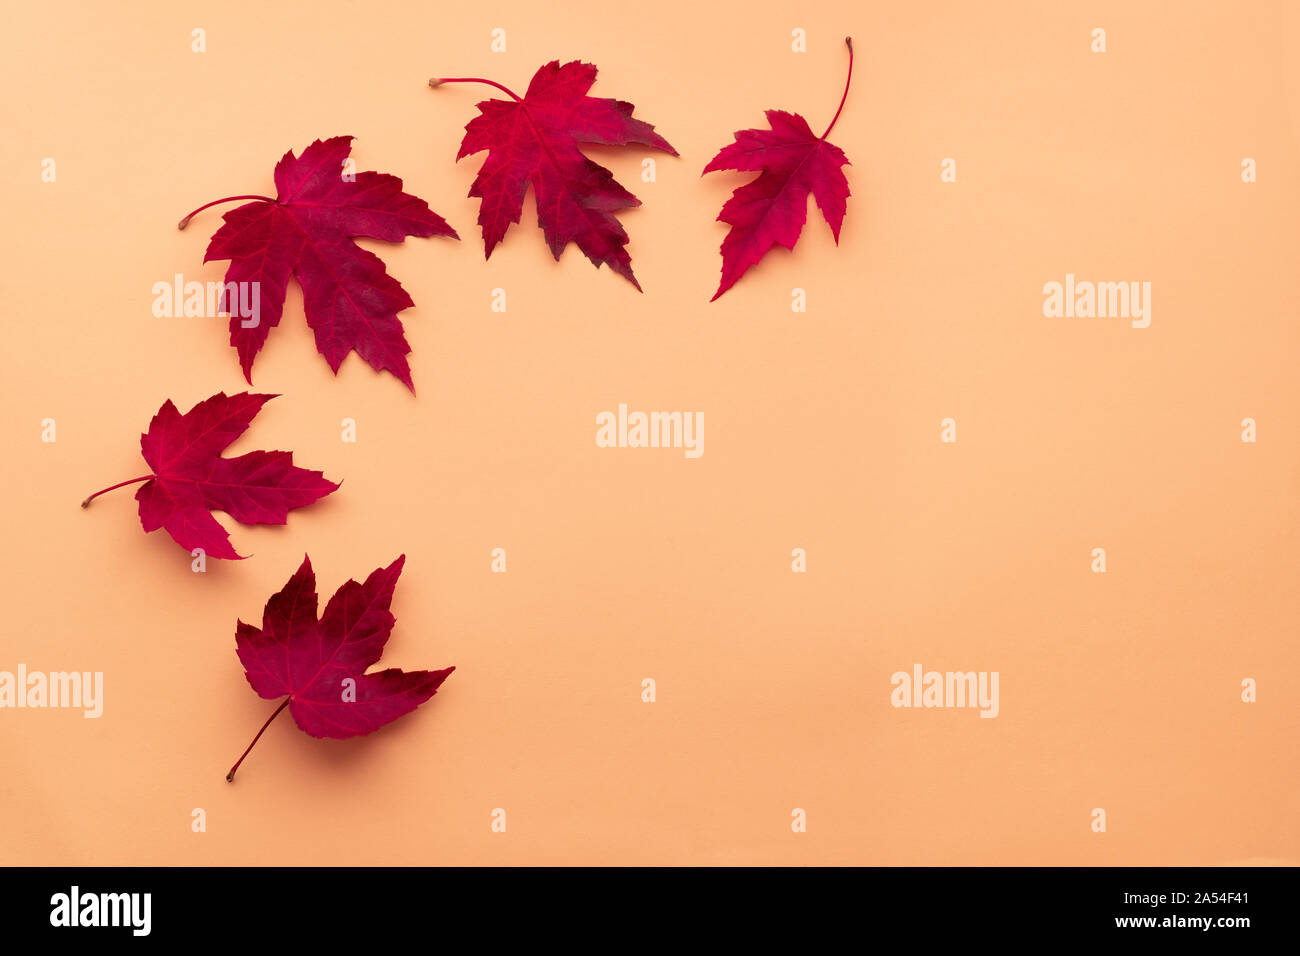 Autumn leaf flat lay composition. Frame from red maple leaves on orange paper background. Autumn concept. Fall leaves design. Top view, copy space Stock Photo